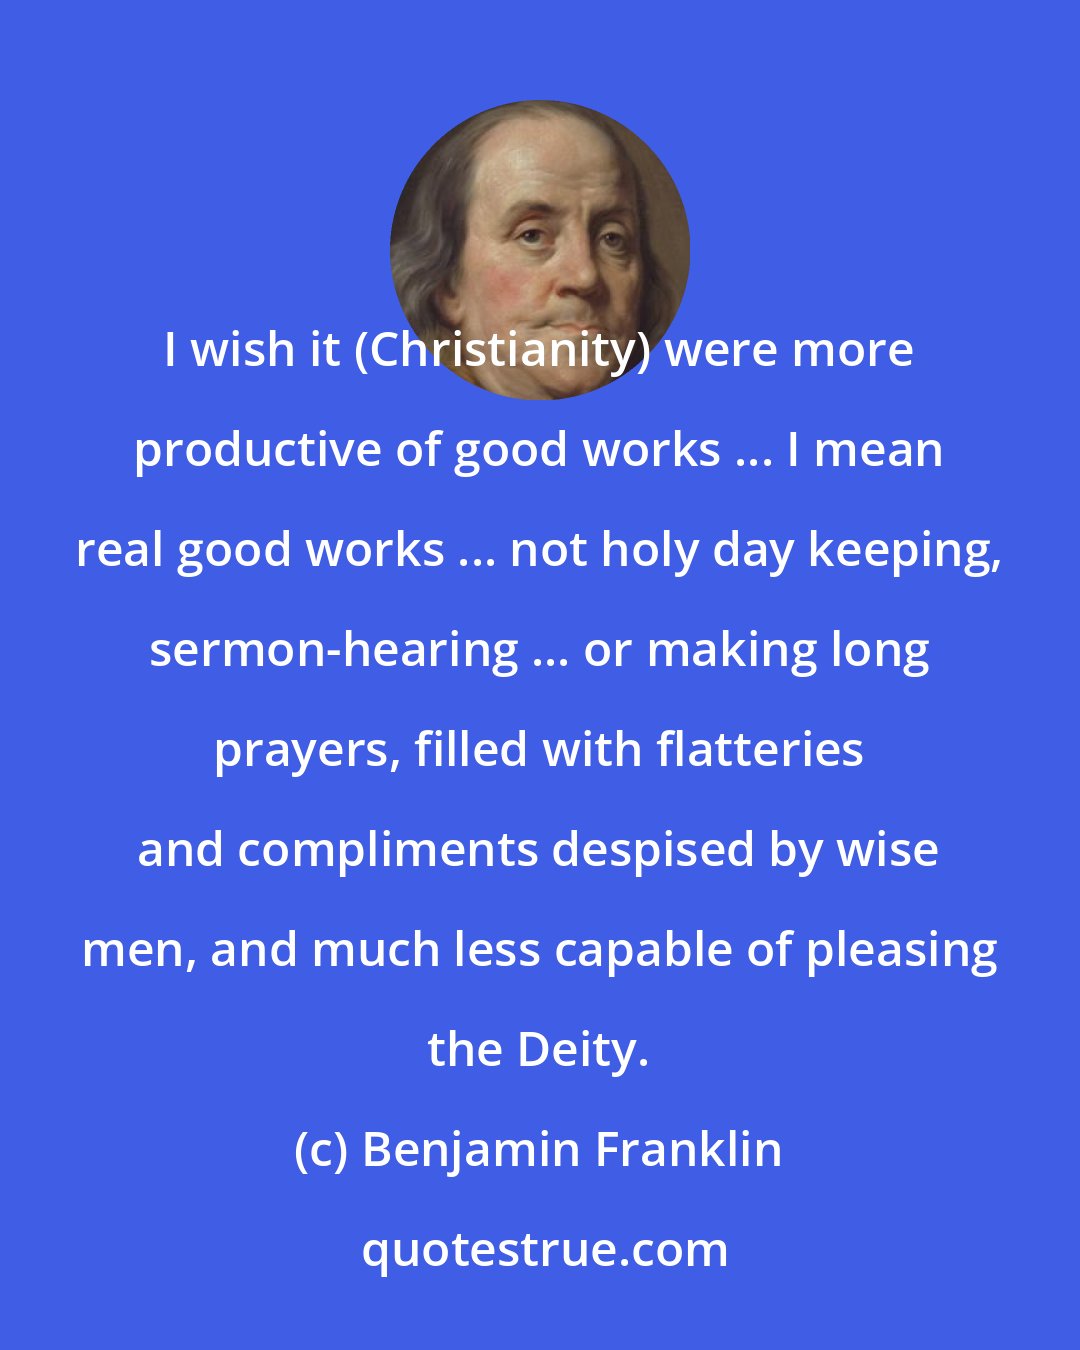 Benjamin Franklin: I wish it (Christianity) were more productive of good works ... I mean real good works ... not holy day keeping, sermon-hearing ... or making long prayers, filled with flatteries and compliments despised by wise men, and much less capable of pleasing the Deity.